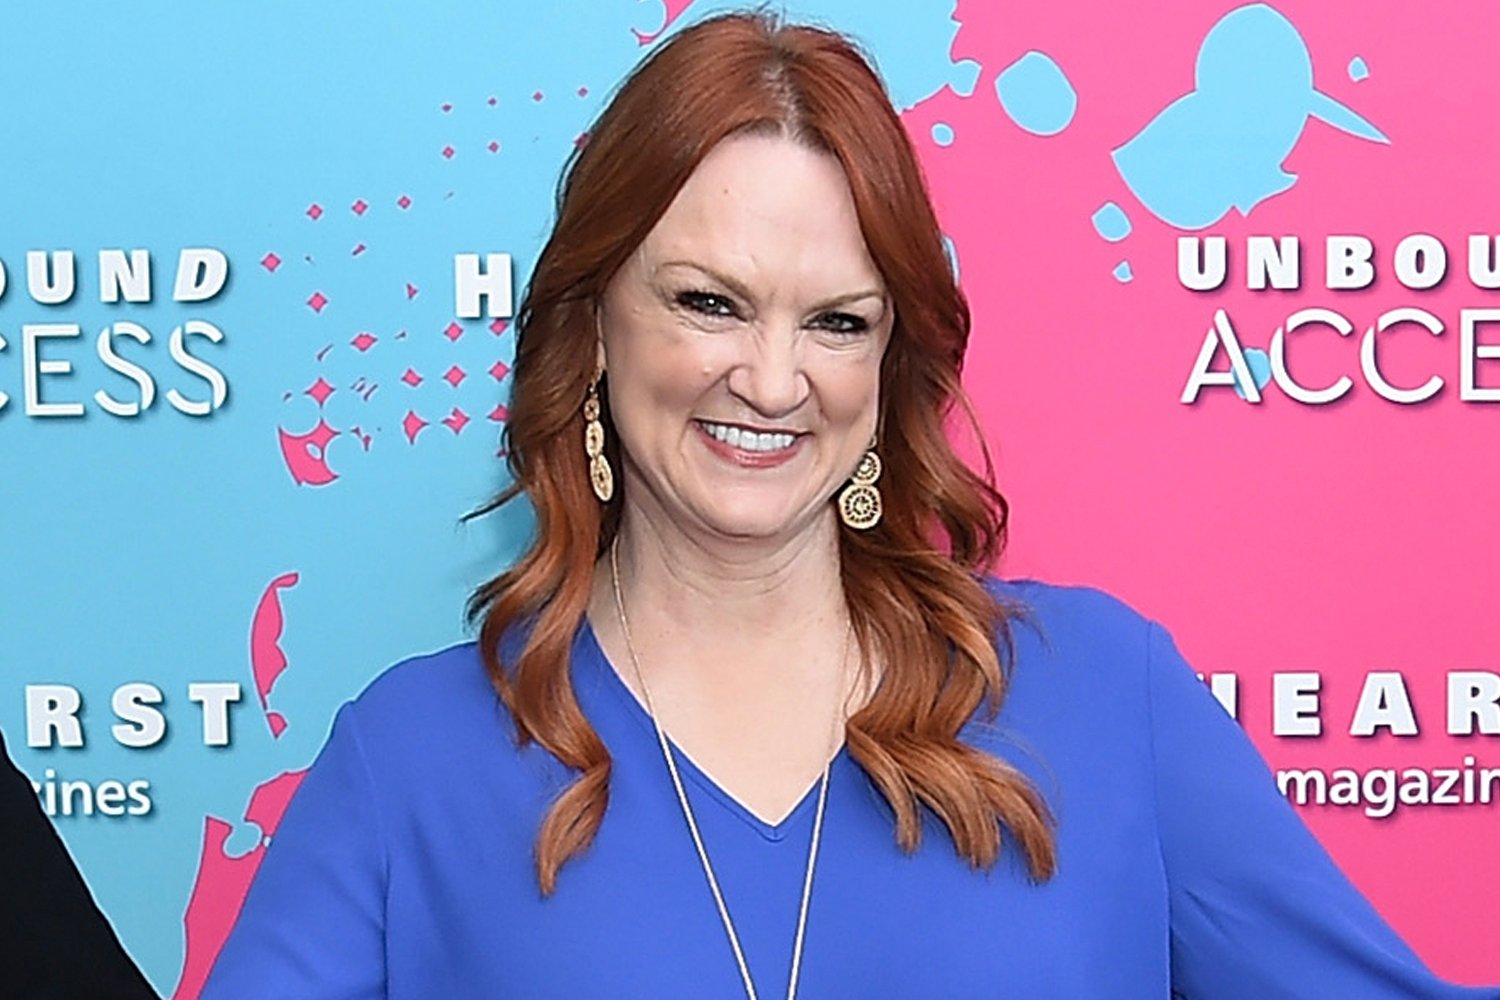 Ree Drummond smiling wearing a blue shirt as she poses for cameras